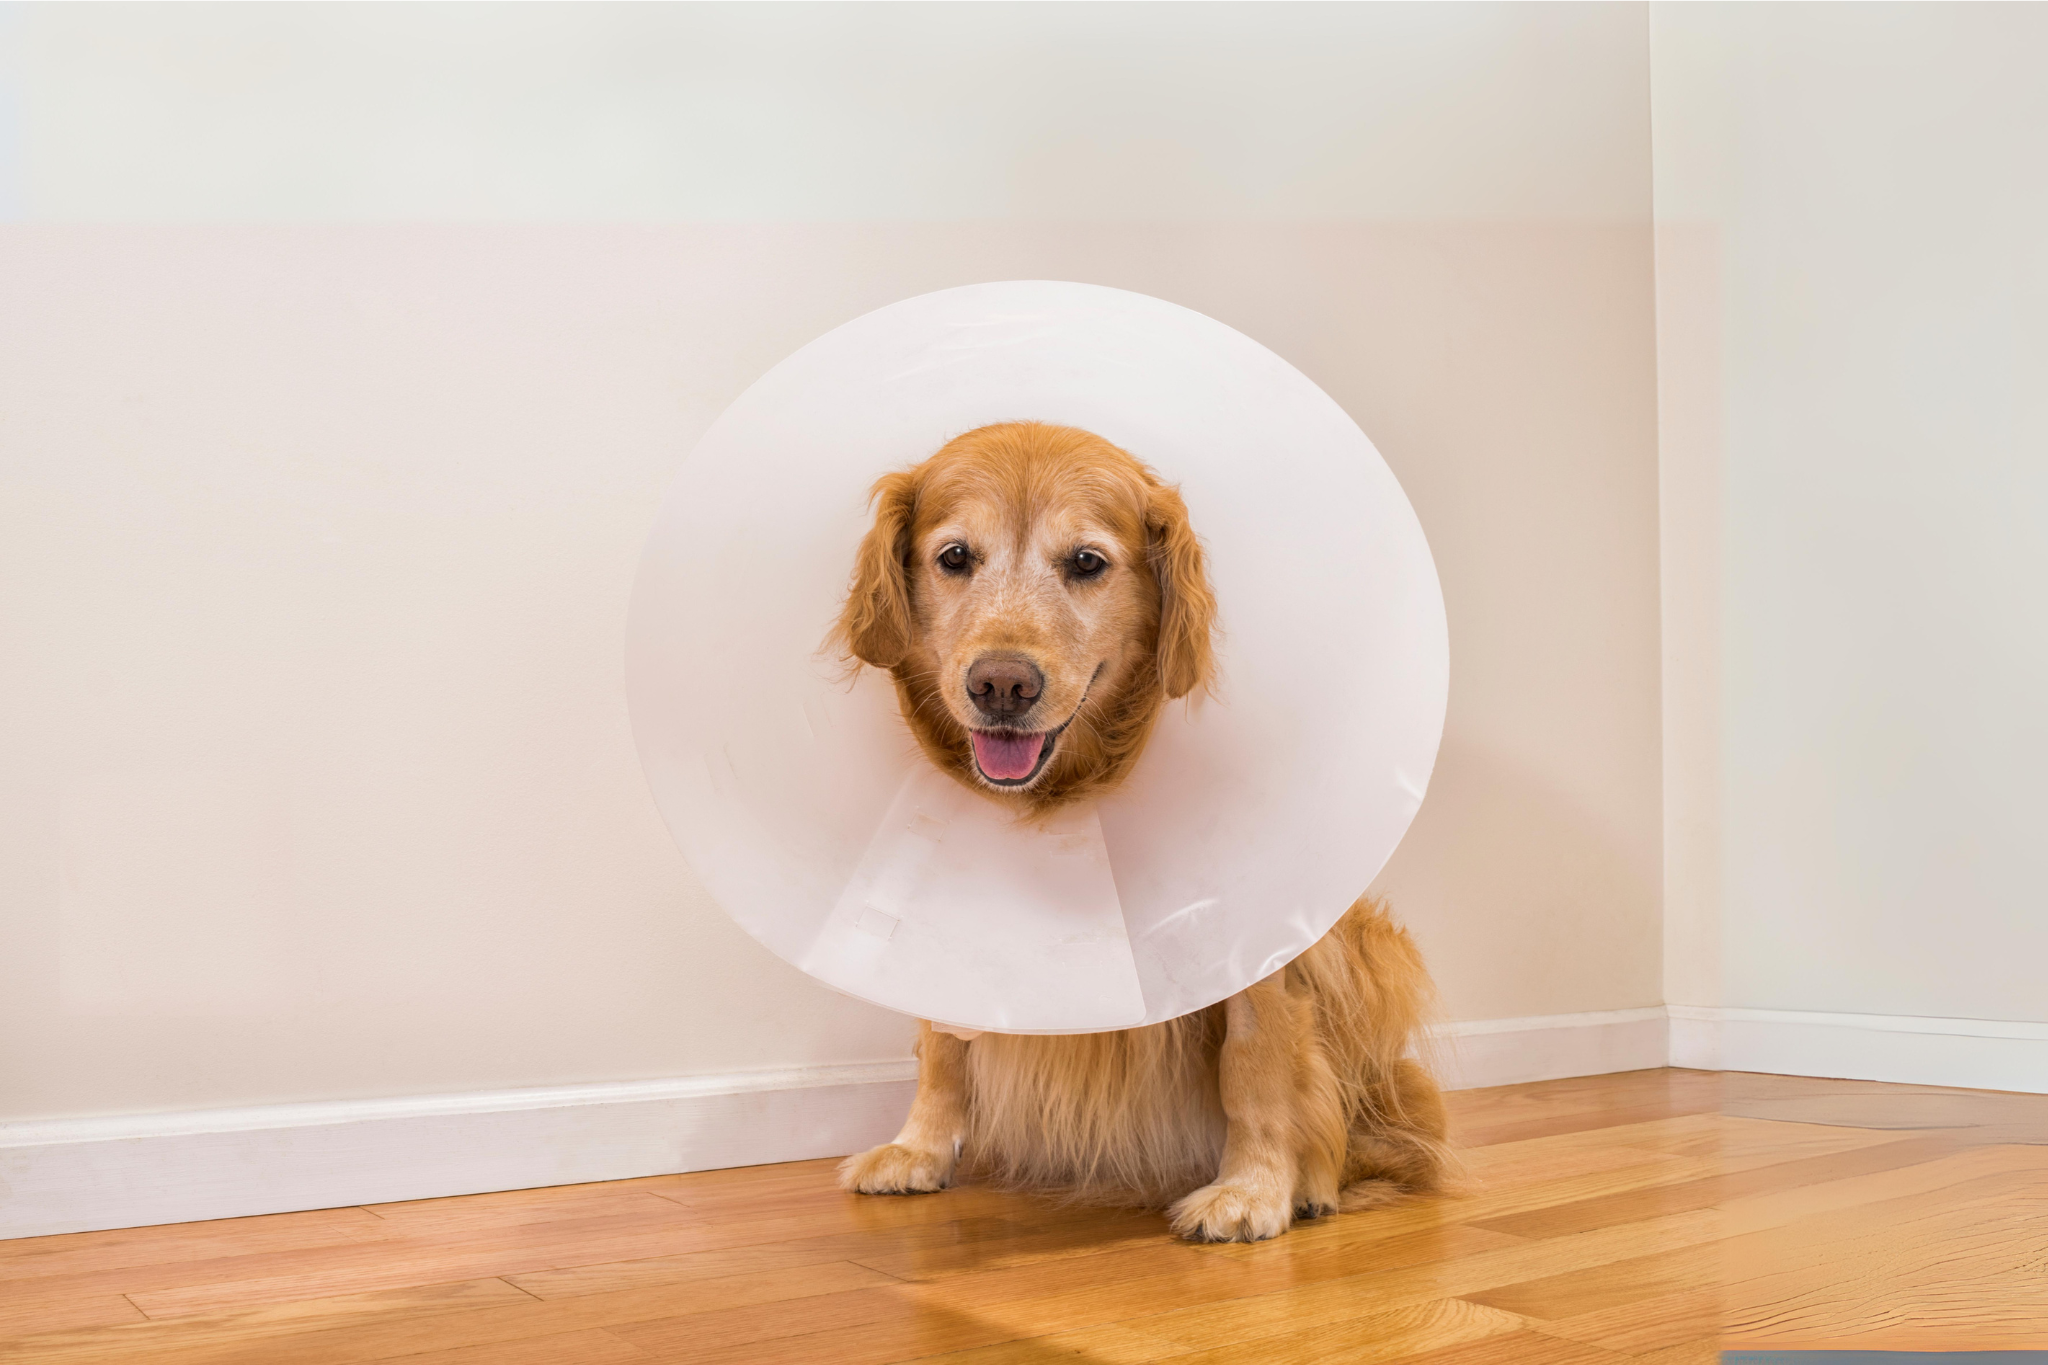 Dog Recovering From Surgery With Cone